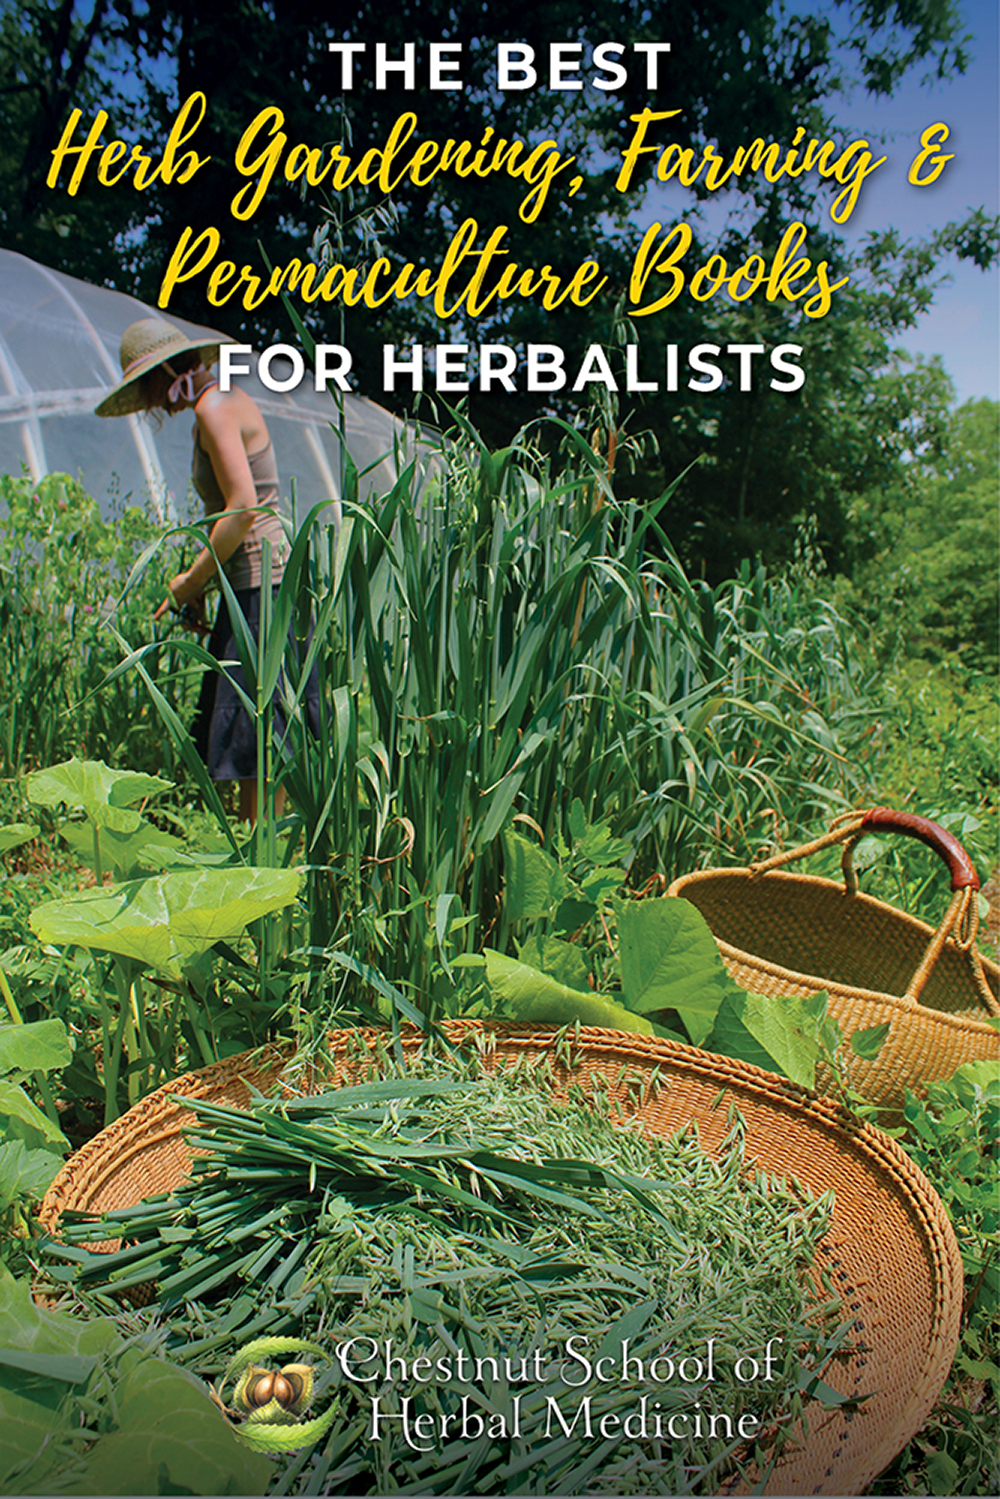 The Best Herb Gardening, Farming & Permaculture Books For Herbalists.